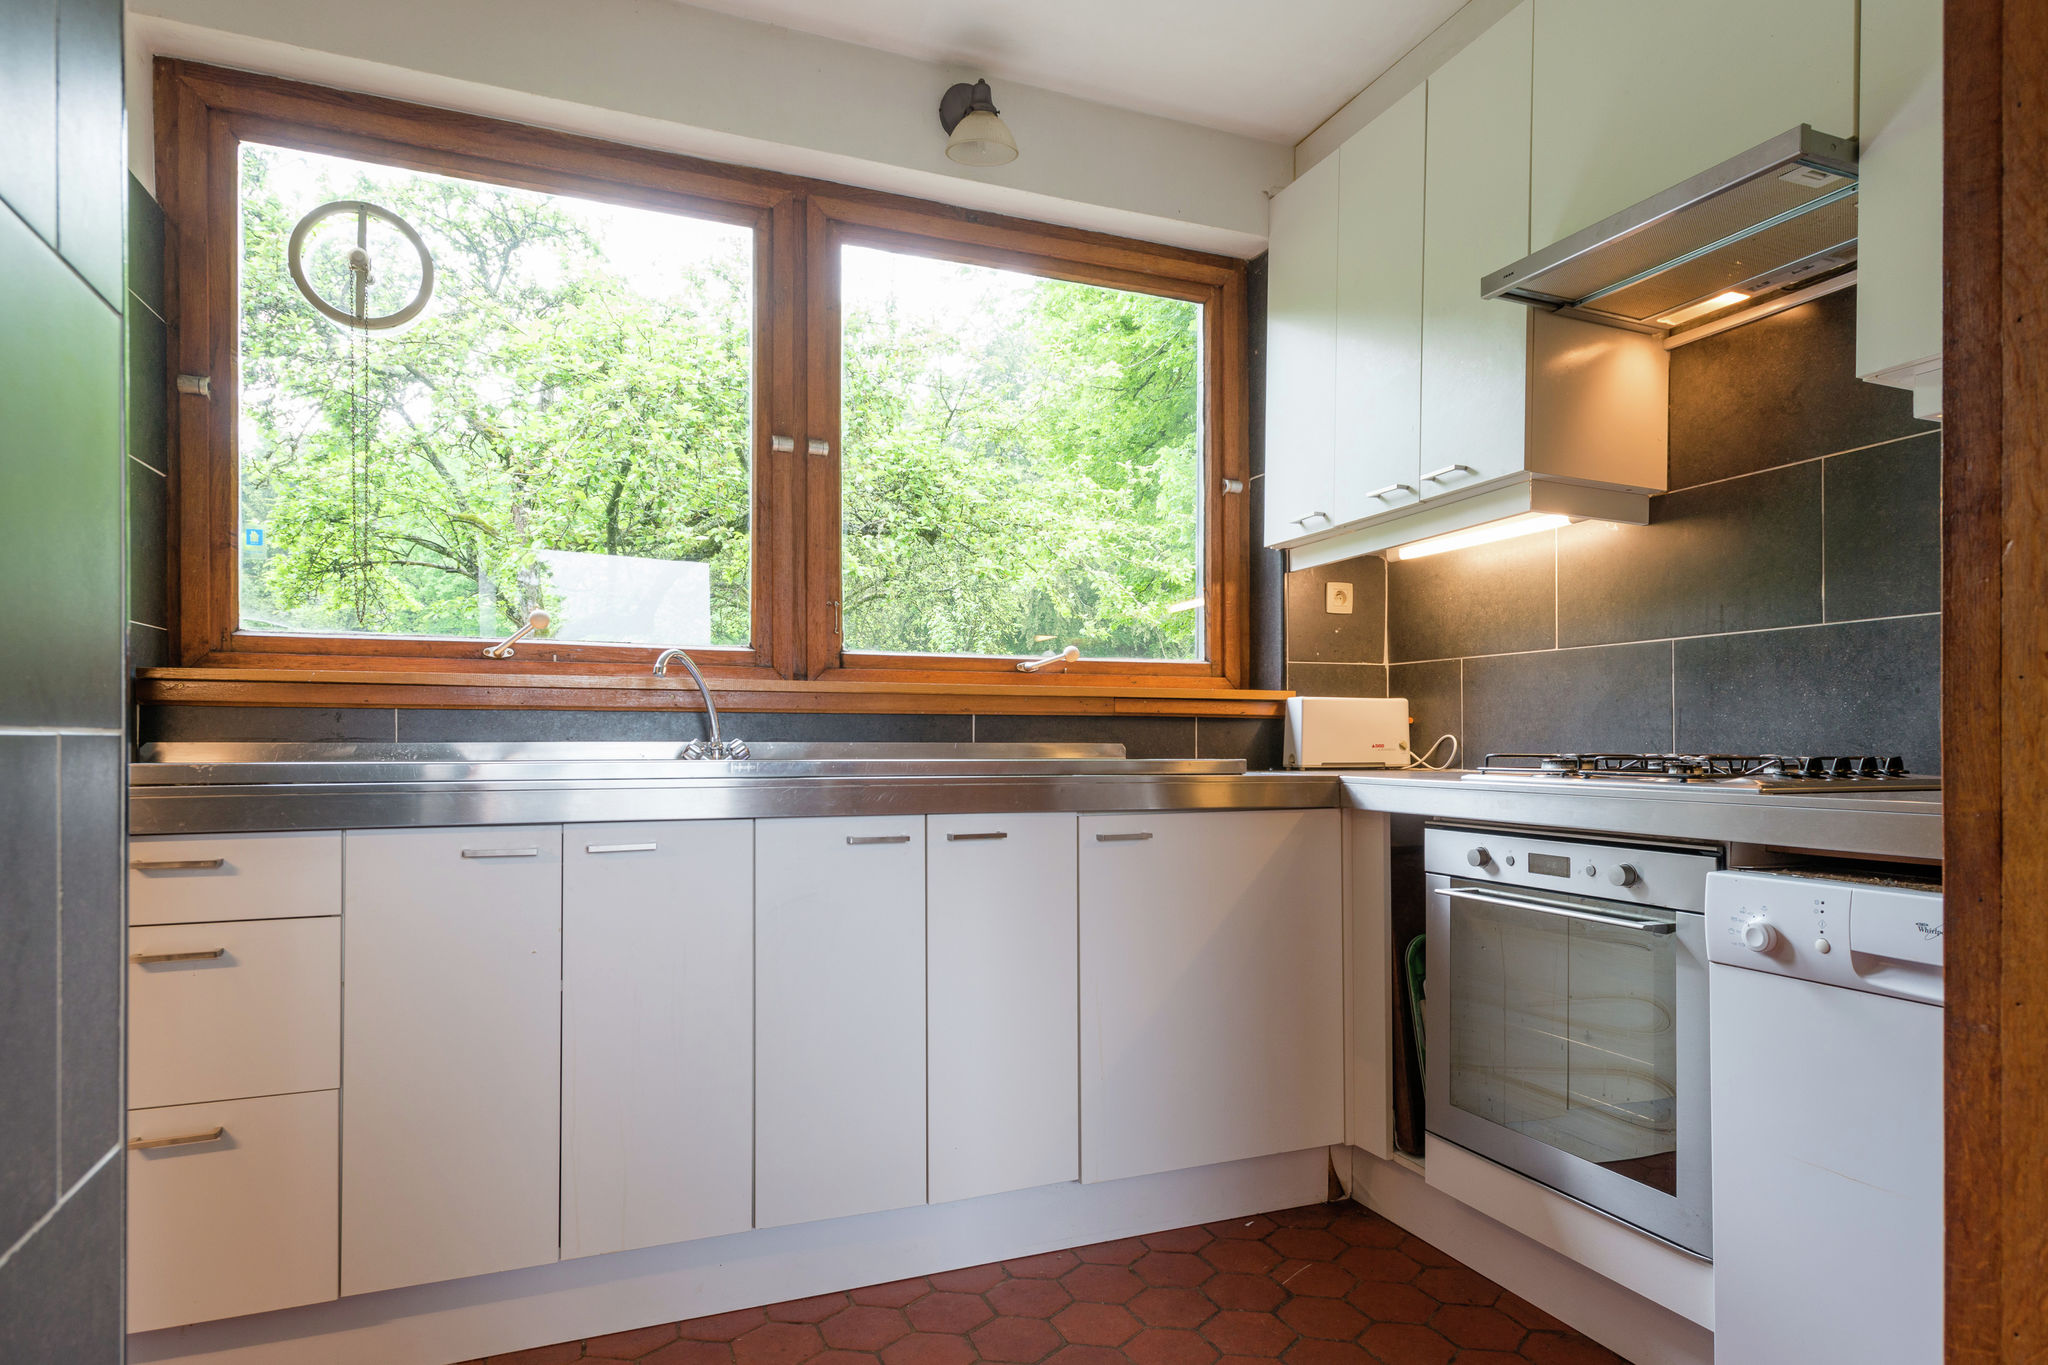 Sunny holiday home in Stavelot in the Houvegnez forest